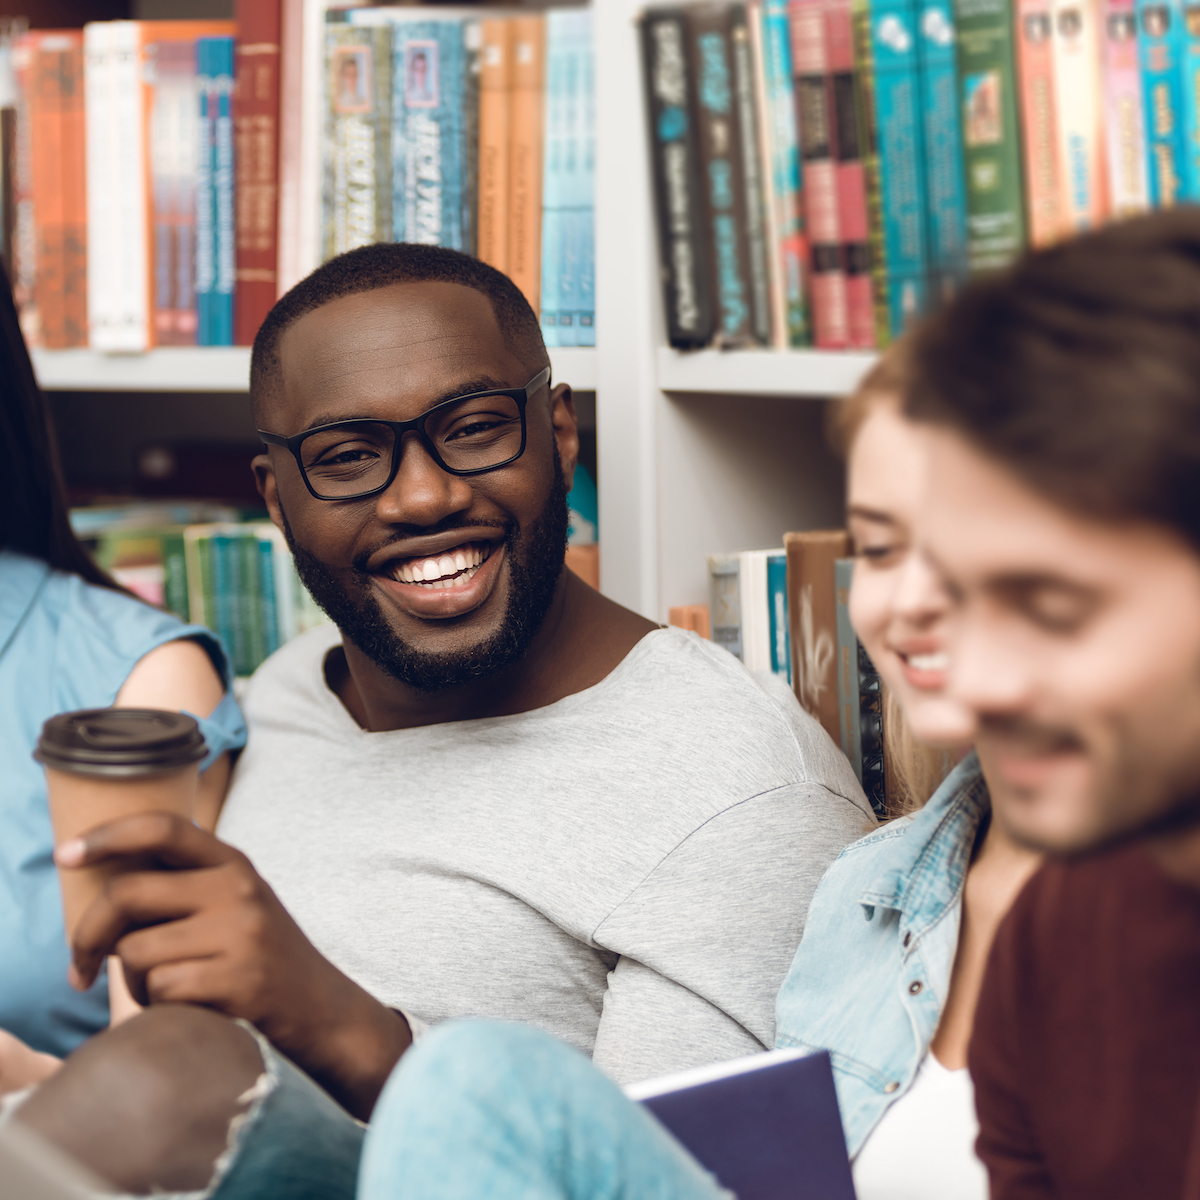 Group of ethnic multicultural students sitting, smiling and talking near bookshelf in library.